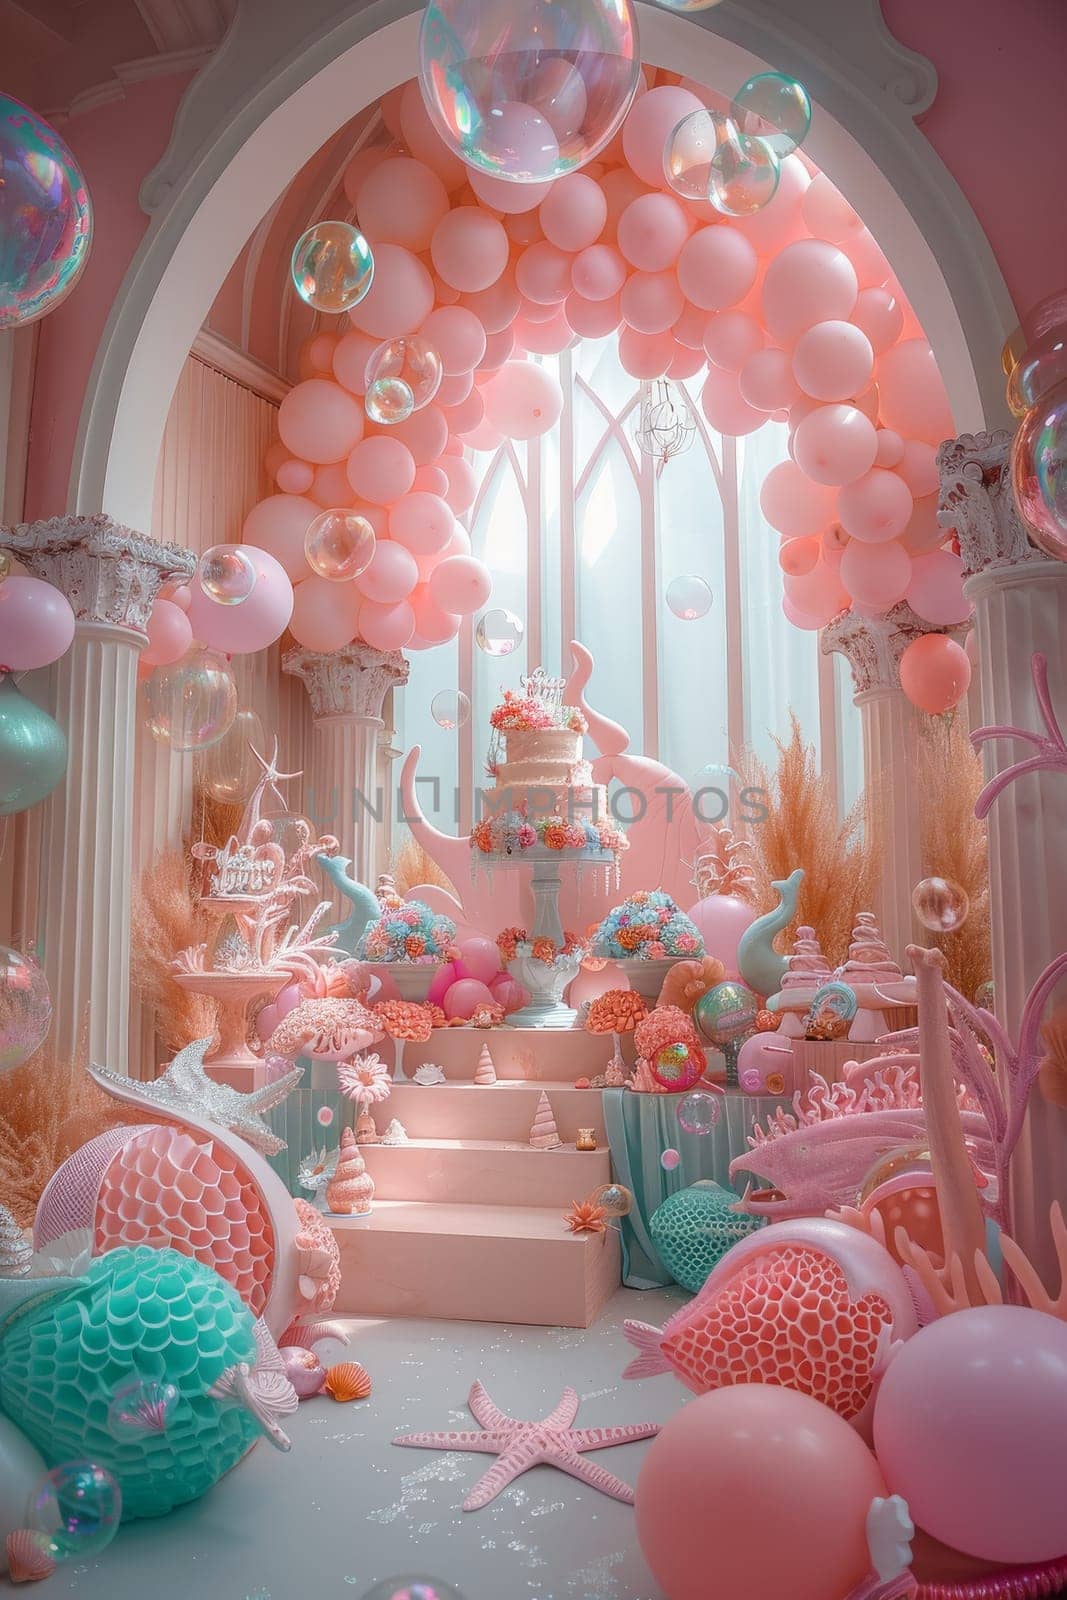 A pink and blue room with a cake and balloons. The room is decorated for a birthday party